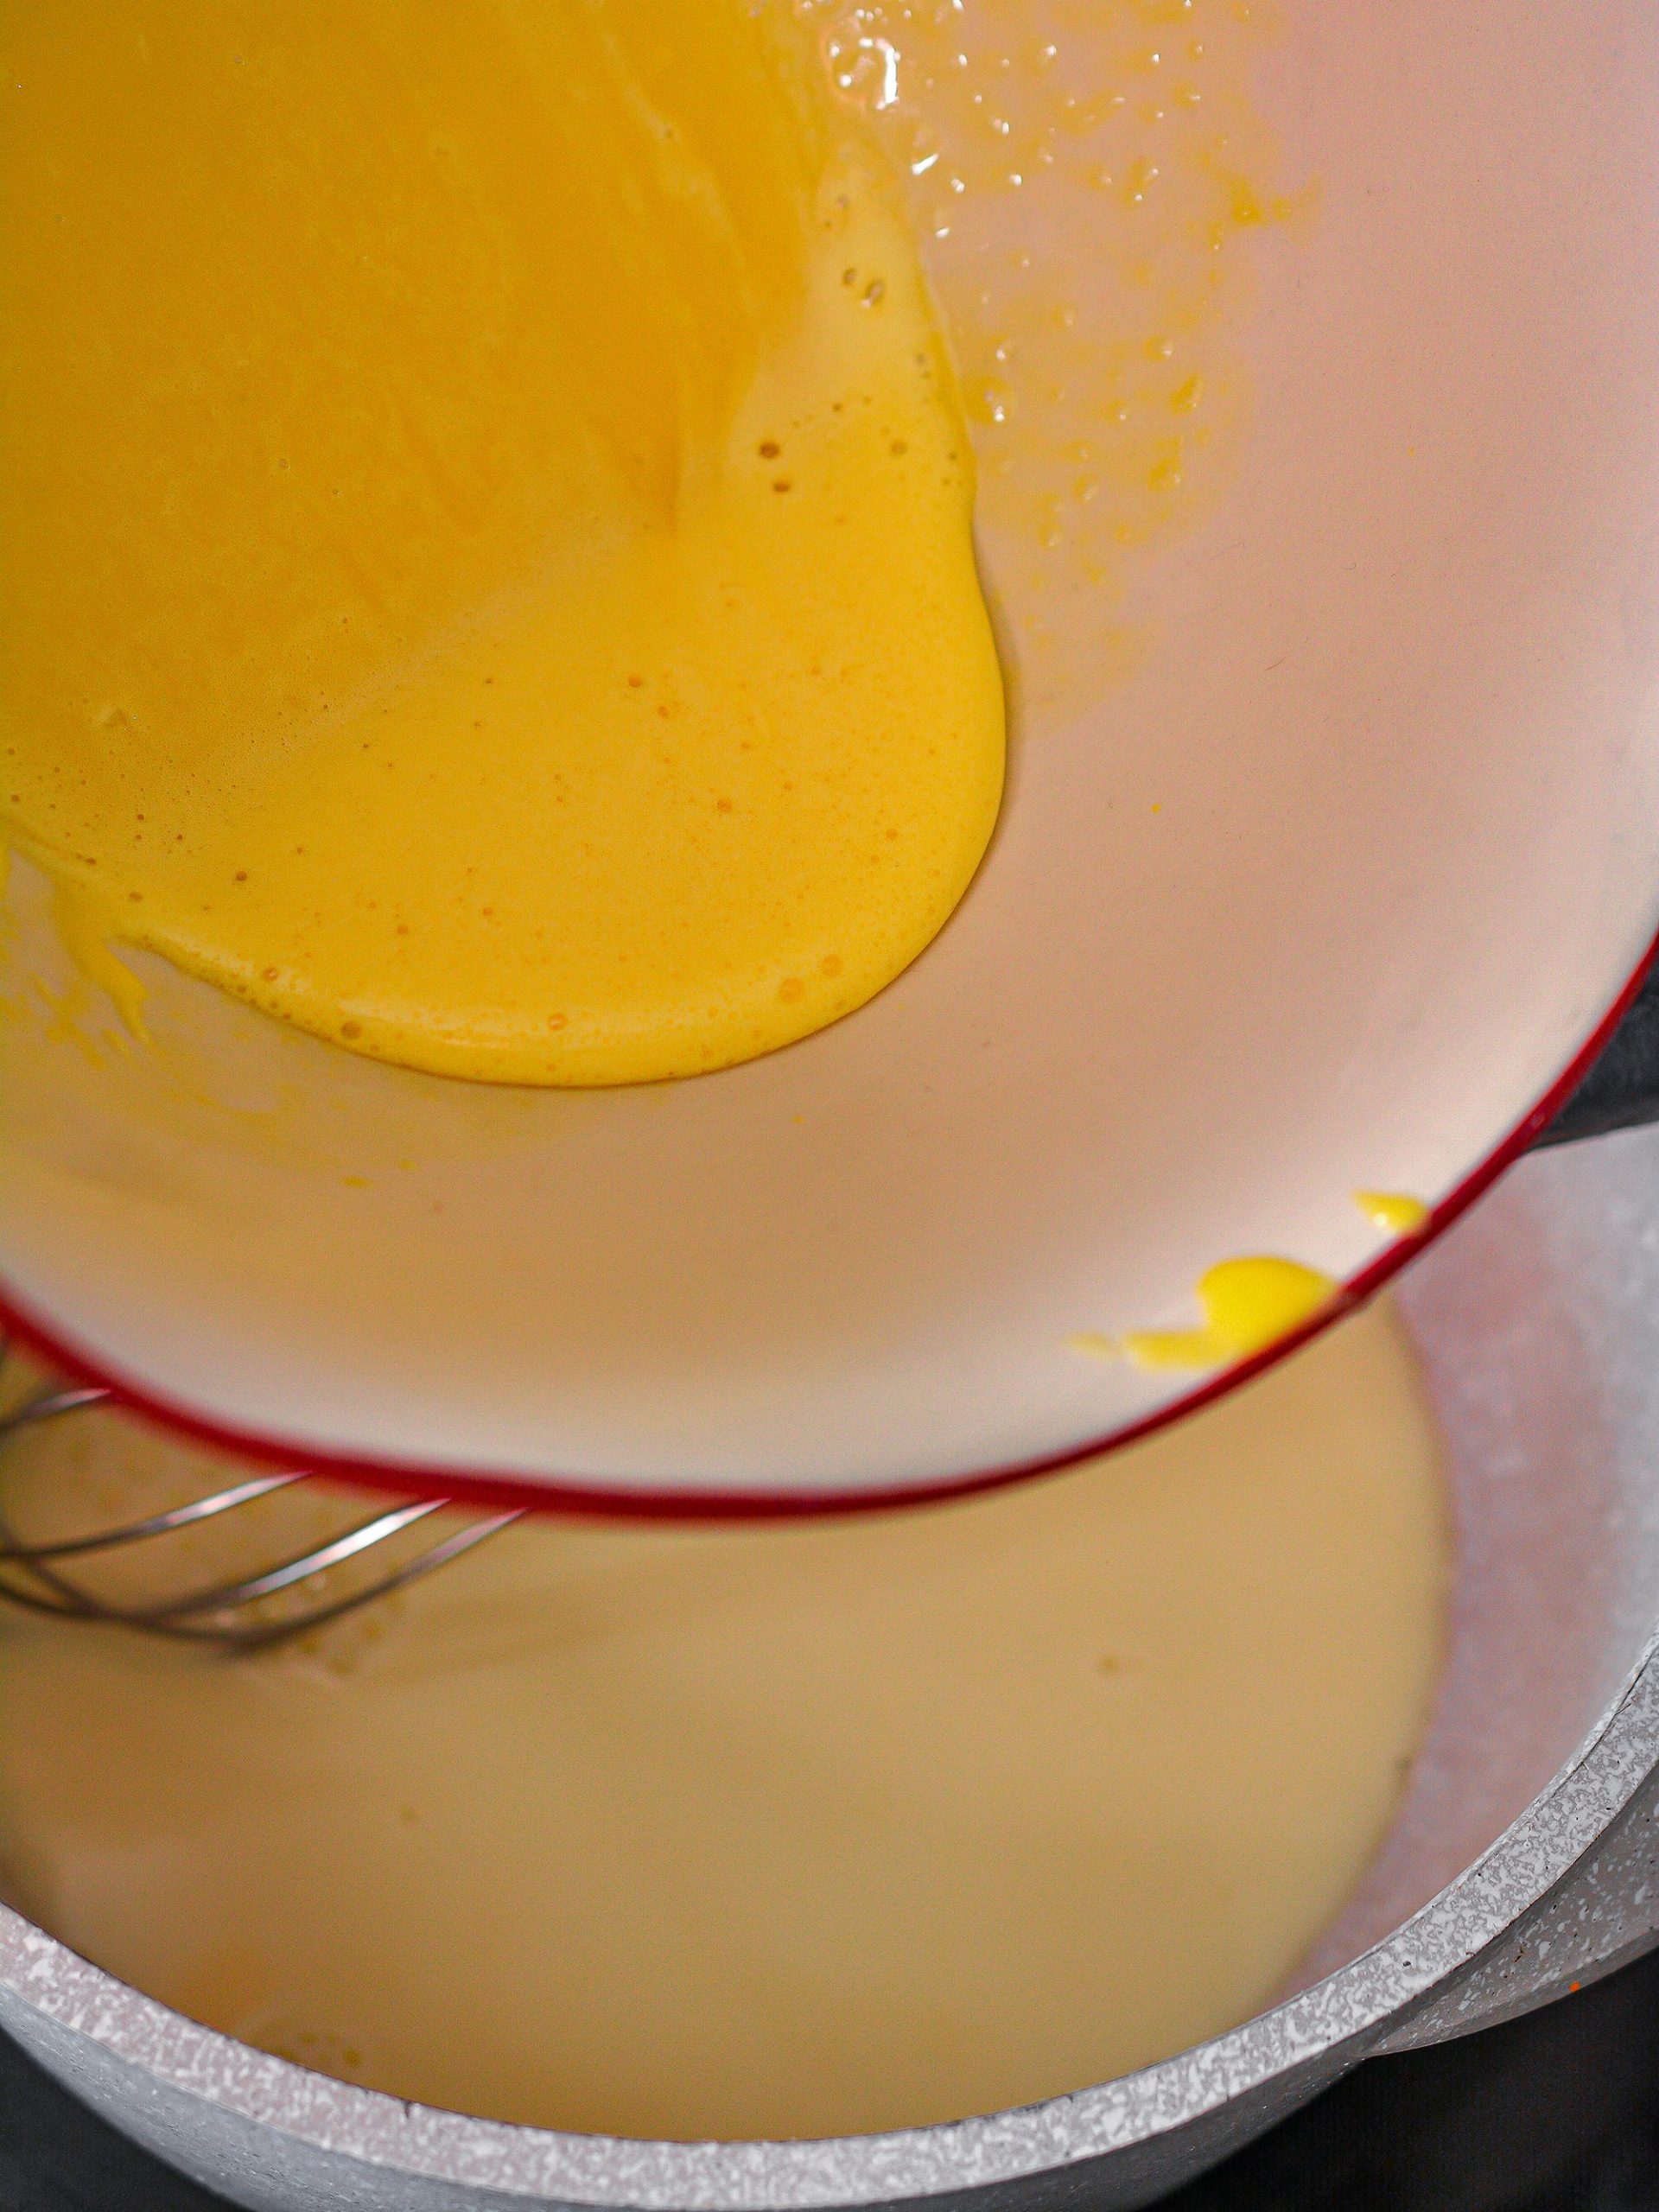 Slowly whisk the egg yolks into the saucepan, mixing continuously.